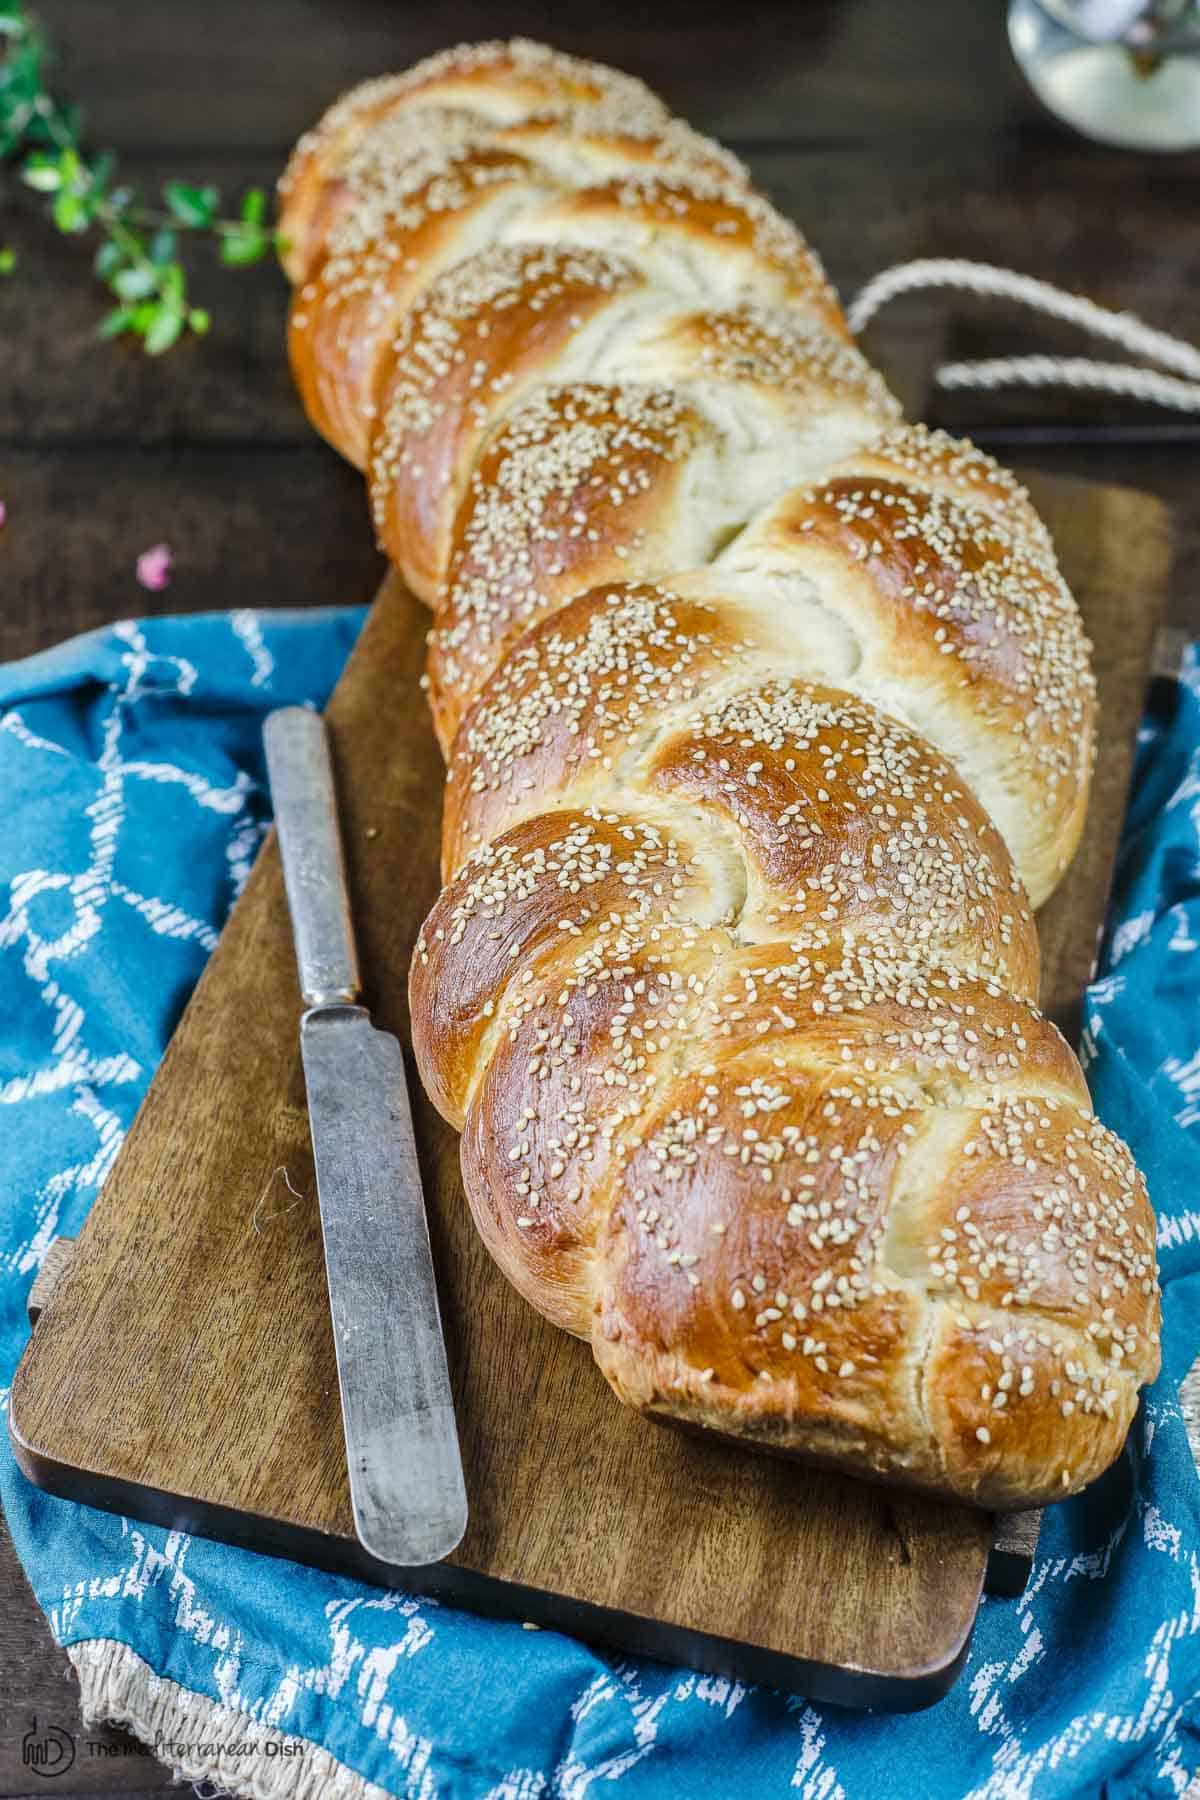 How to Make Challah Bread | Easy Challah Recipe - The Mediterranean Dish